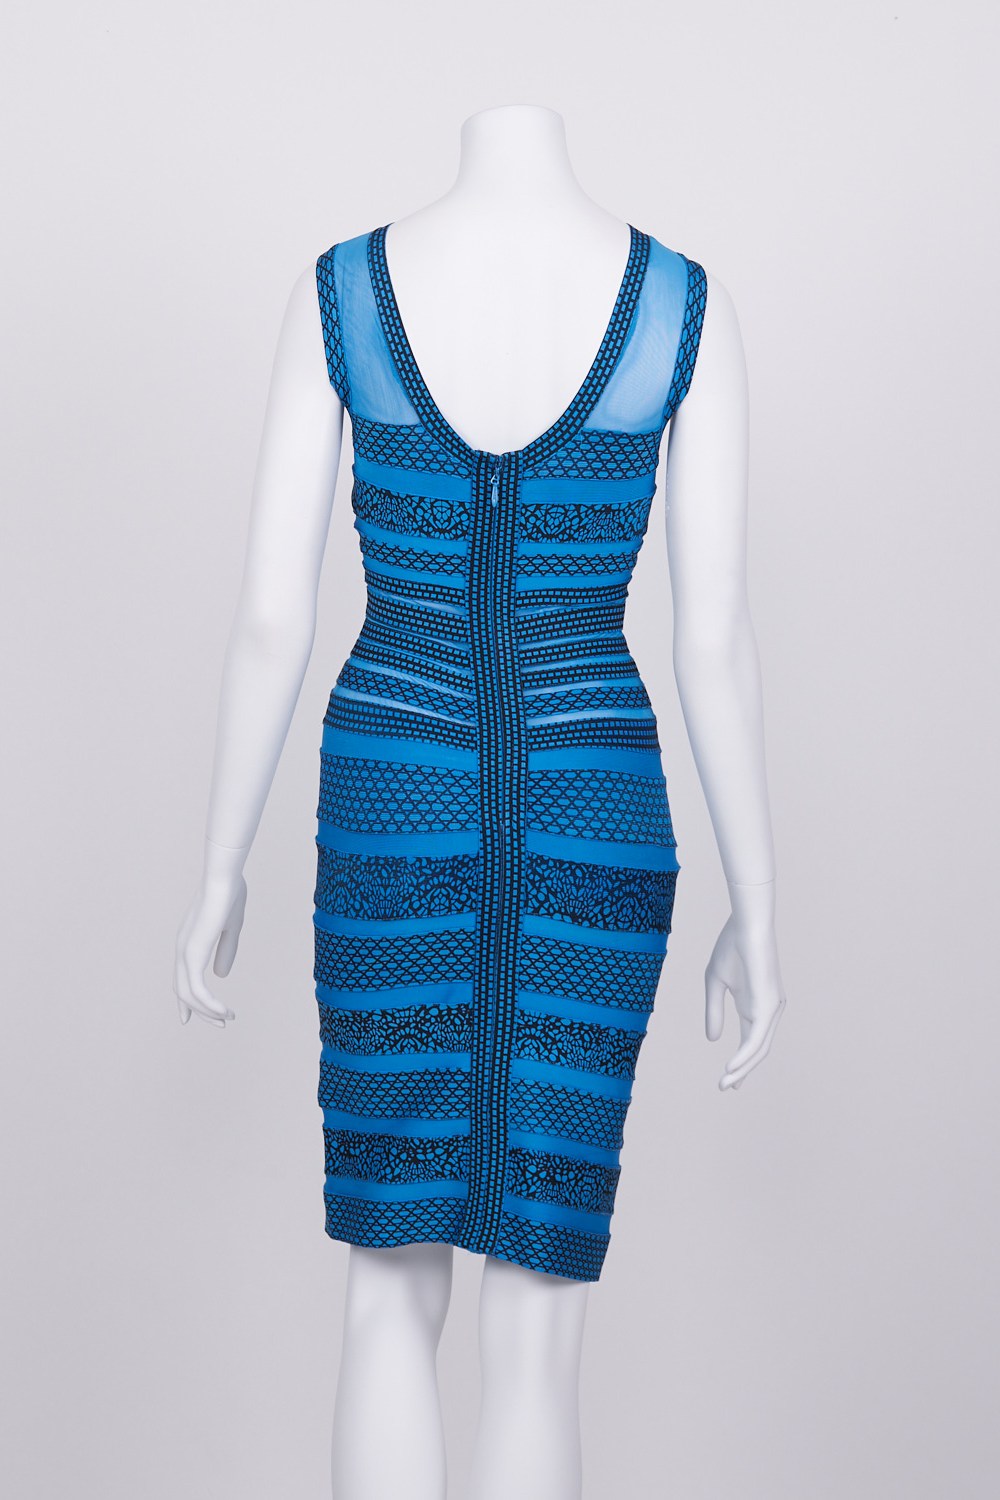 Blockout Blue And Black Patterned Bodycon Dress S